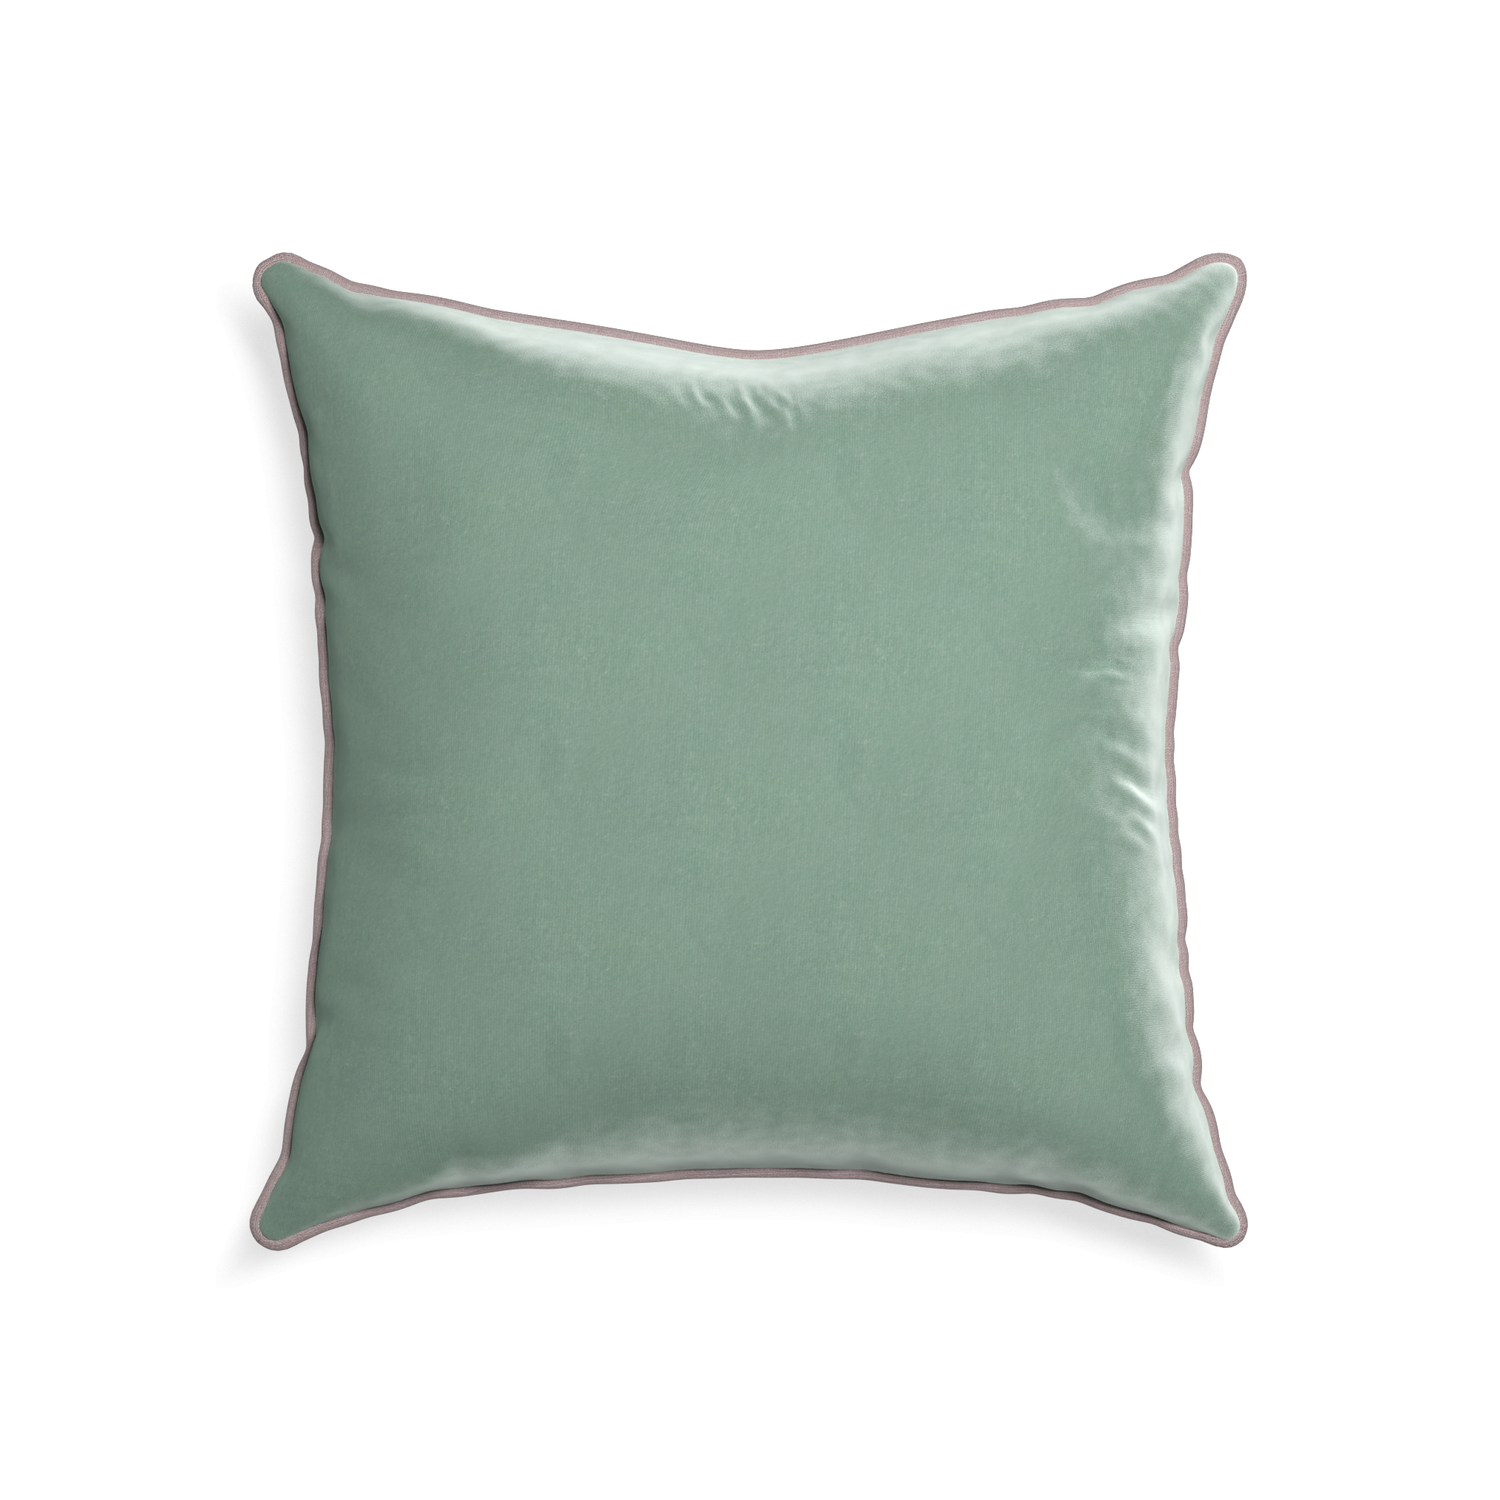 22-square sea salt velvet custom blue greenpillow with orchid piping on white background